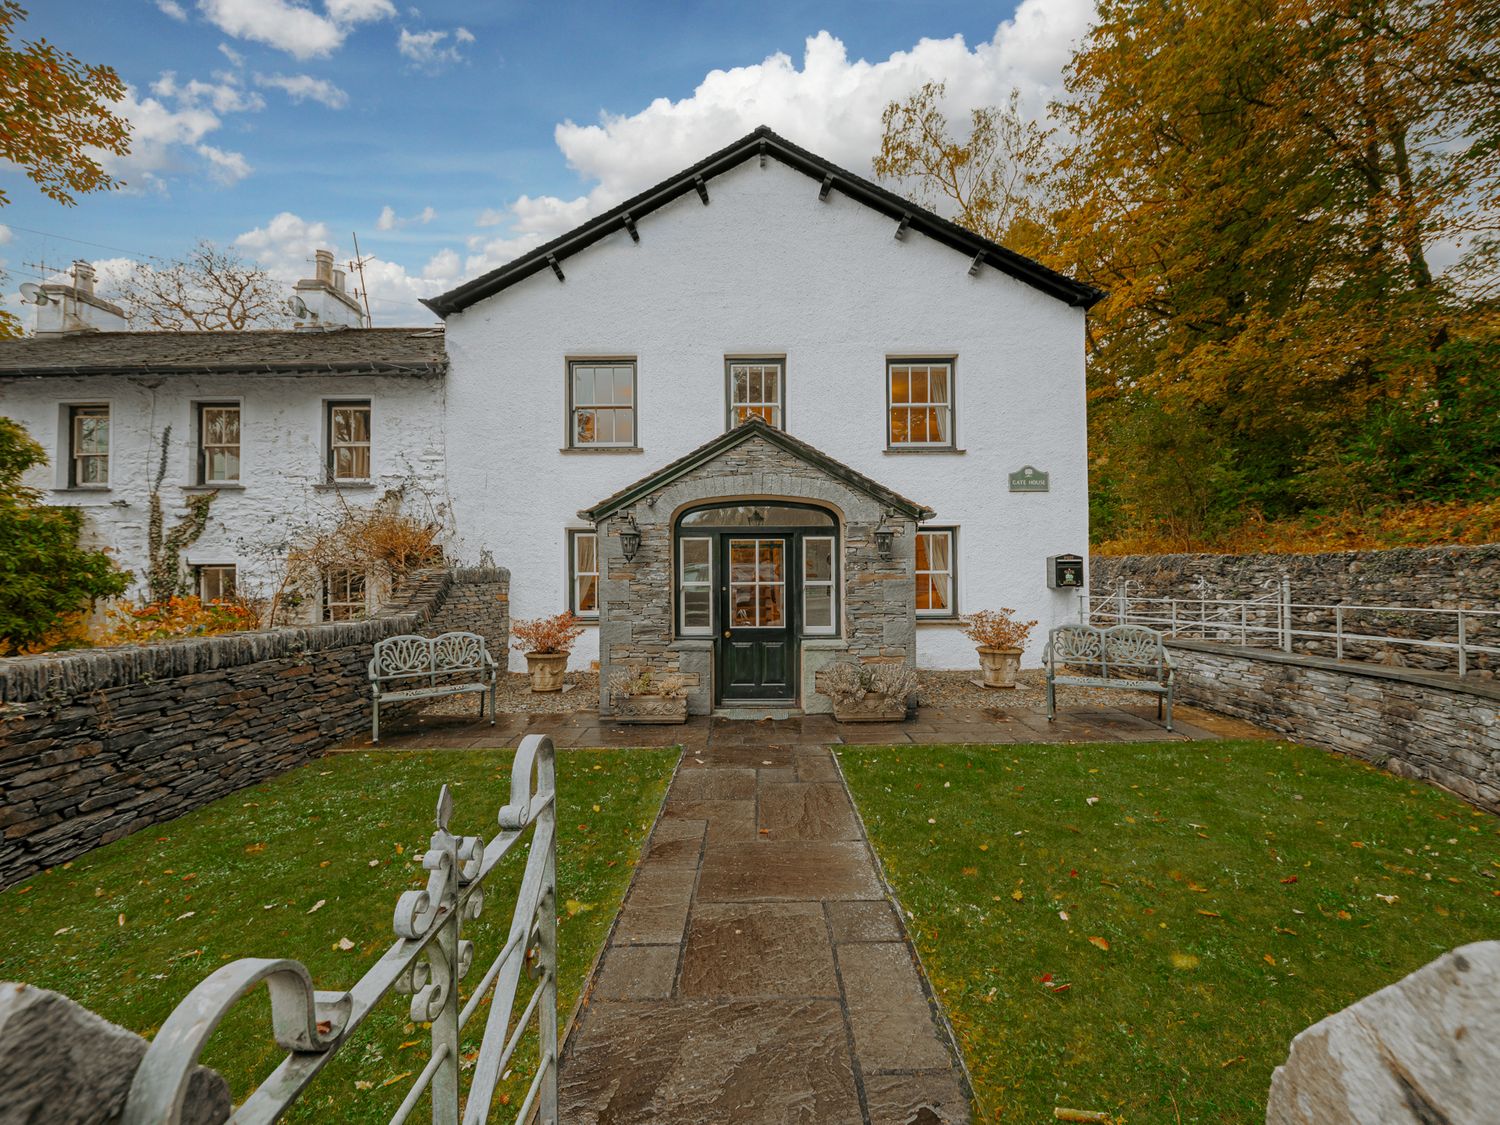 Gate House, is in Coniston, Cumbria. Four-bedroom home with stunning riverside views. Hot tub. Pets.